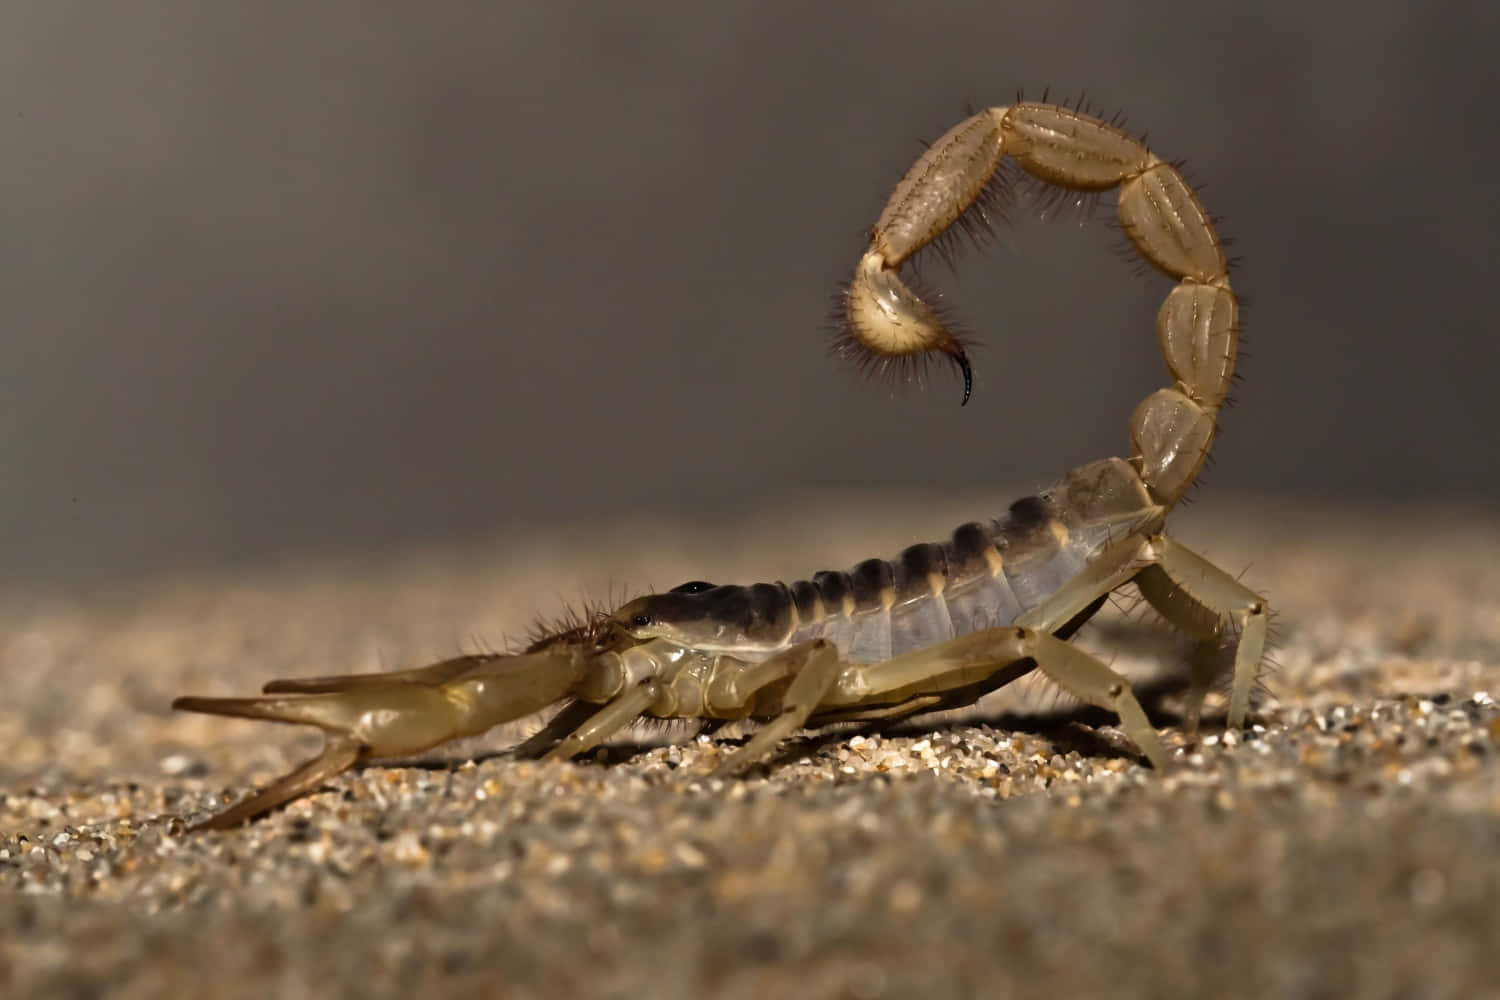 A detailed drawing of an menacing and mysterious scorpion